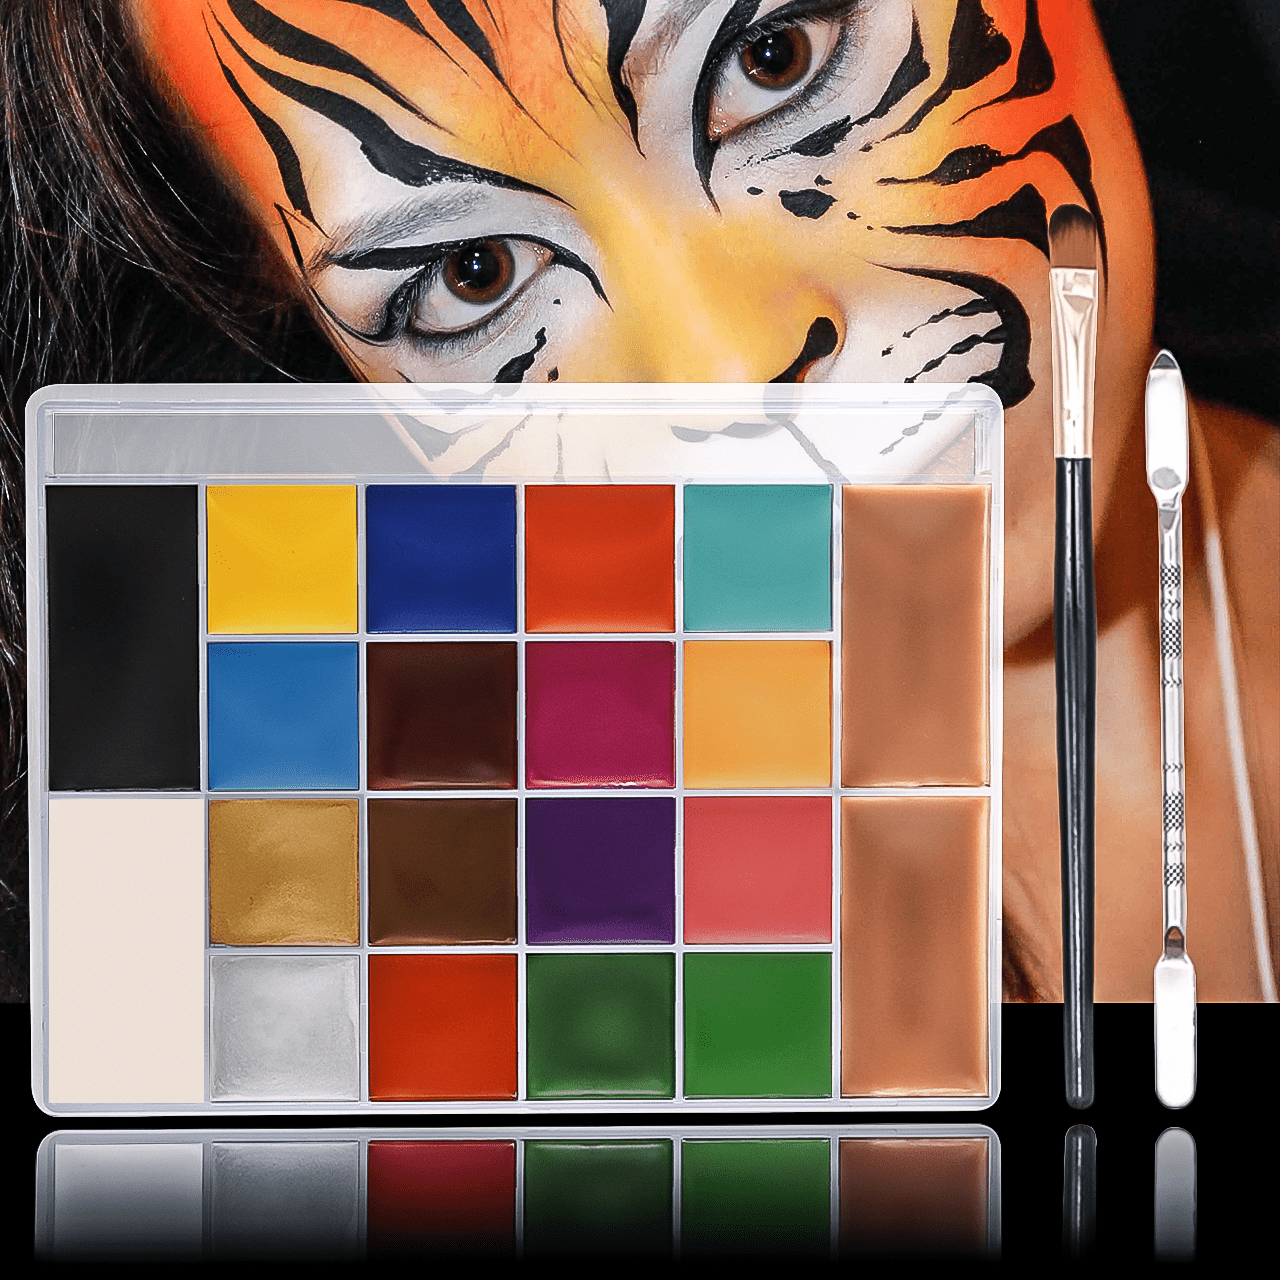  39 Colors Water Activated Face Painting Kit For Kids -  Professional Face Paint with Stencil - Non Toxic Facepaint Kit with Brushes  for Goth Makeup Emo Makeup : Arts, Crafts & Sewing